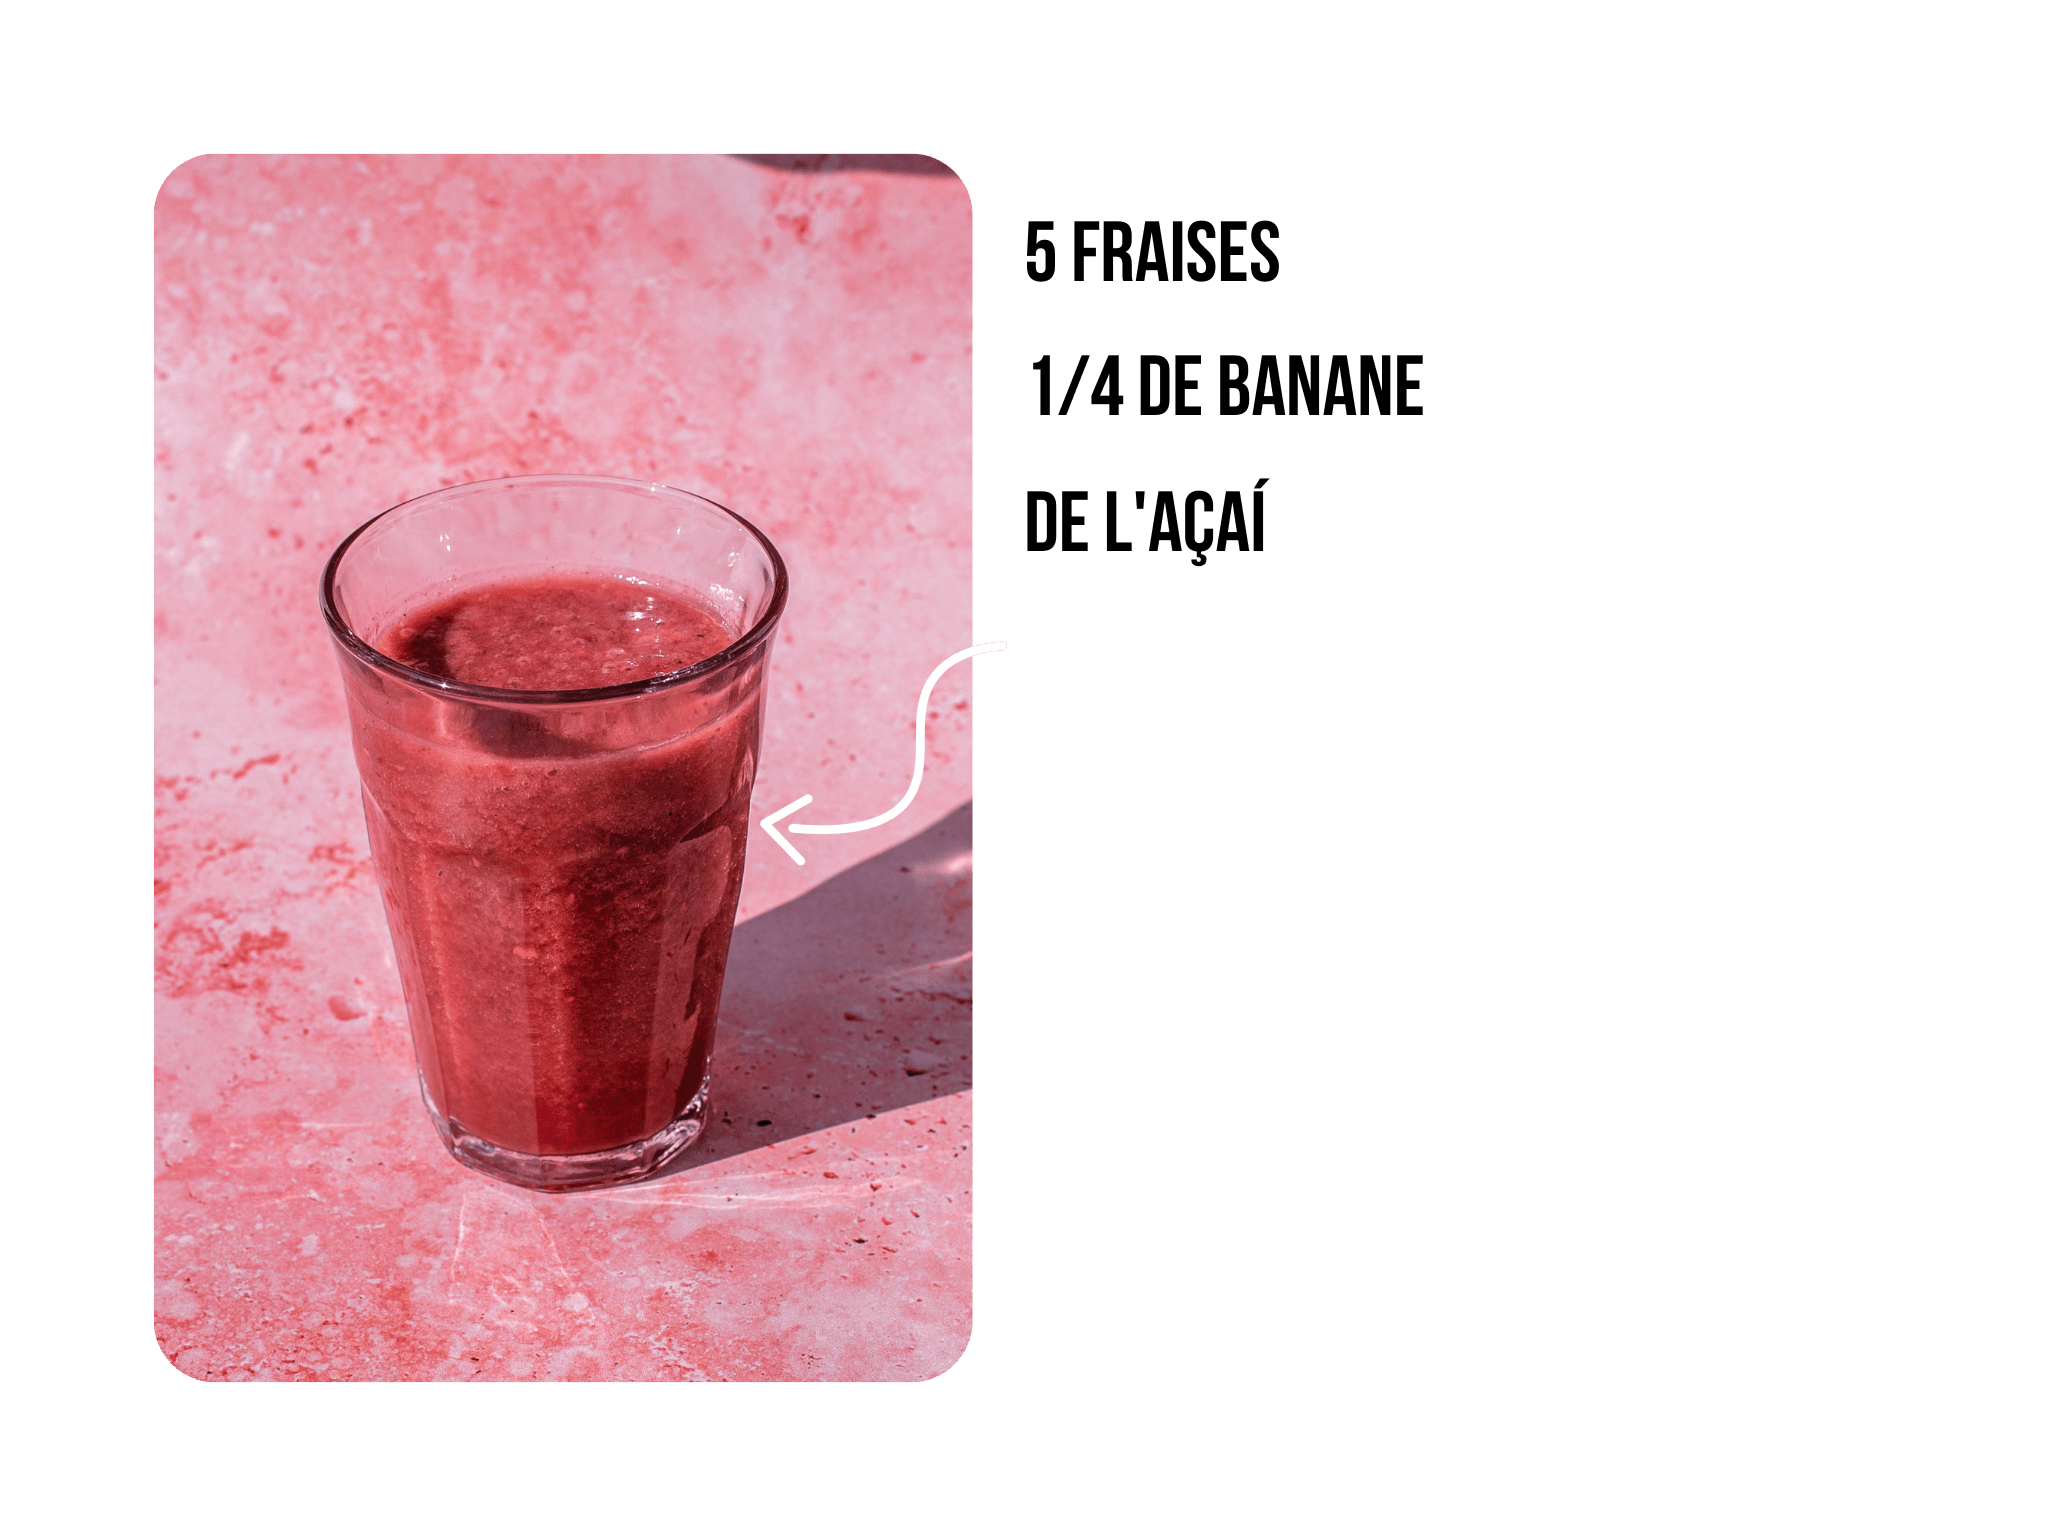 Le smoothie IMMORTEL by Nossa !